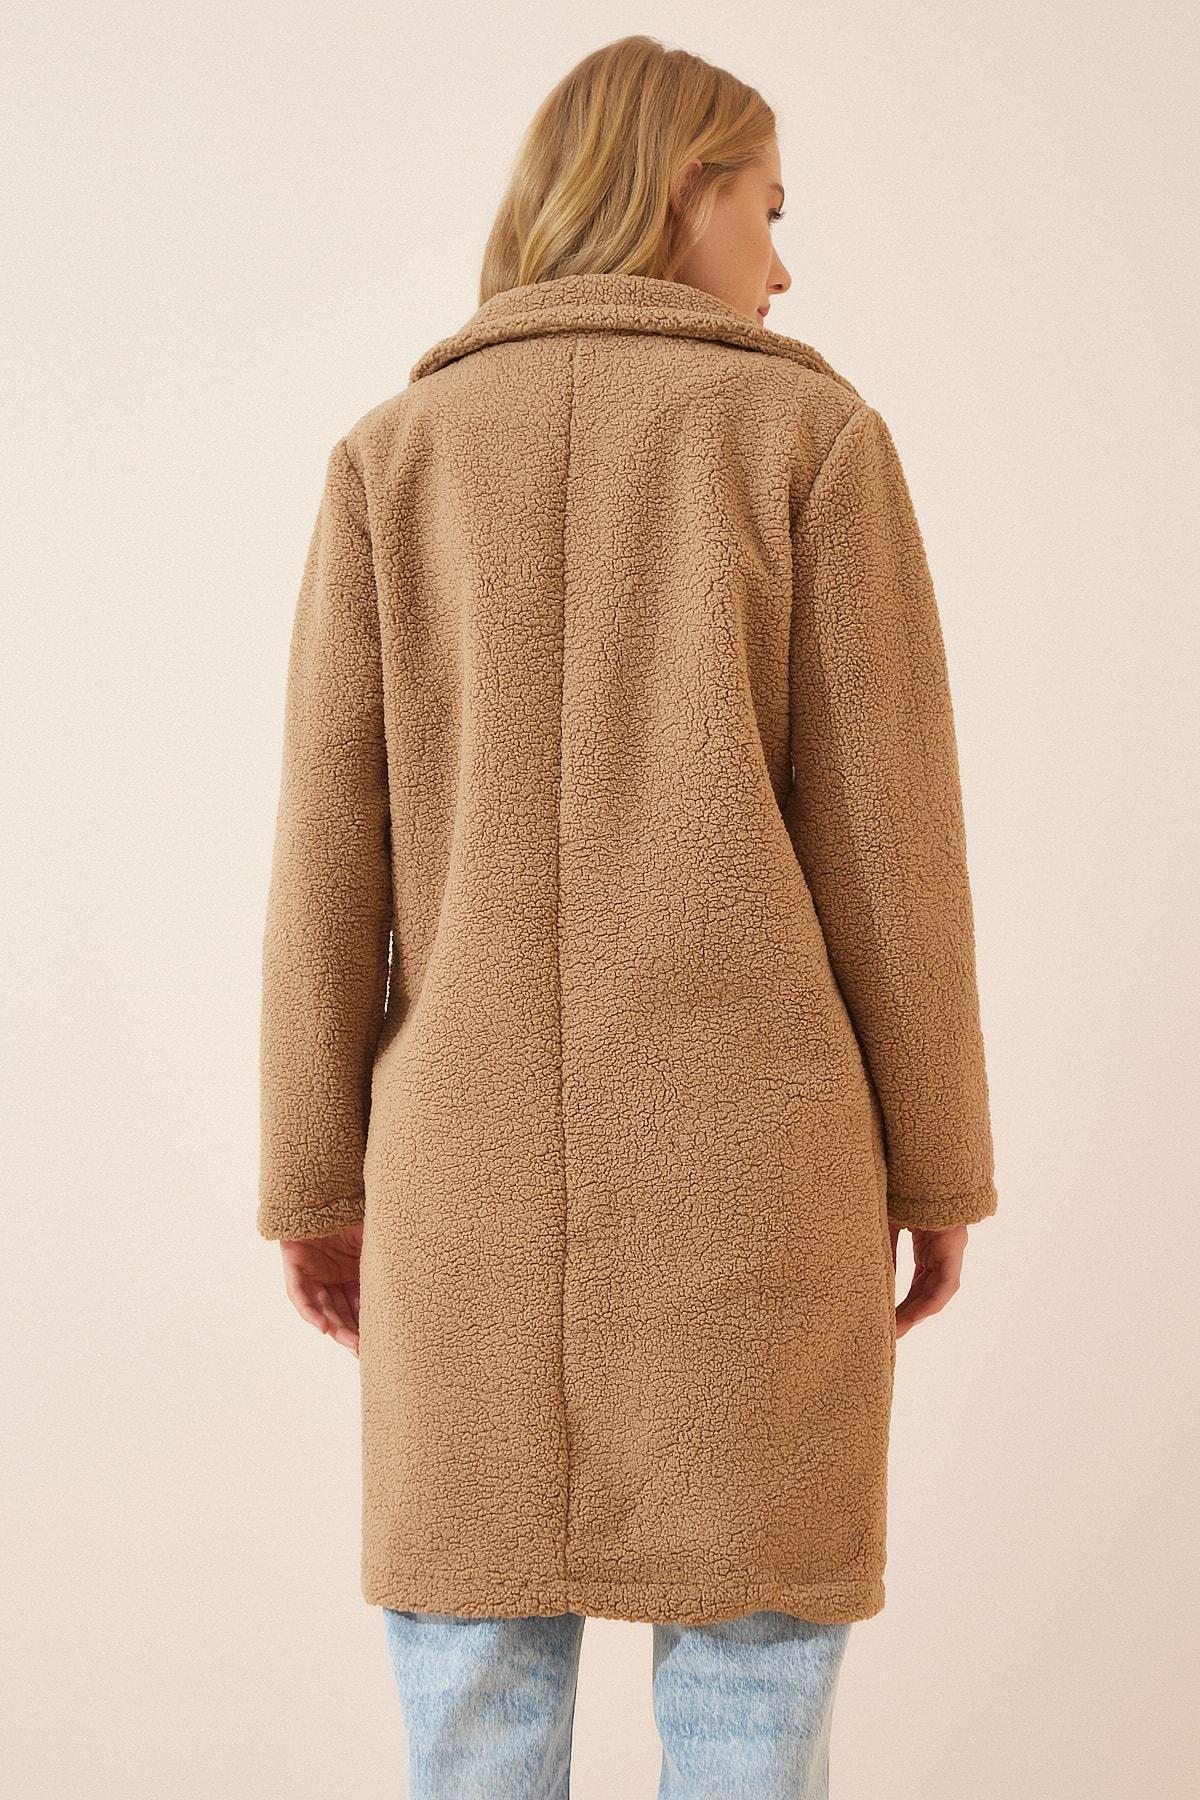 Happiness Istanbul - Beige Puffer Coat